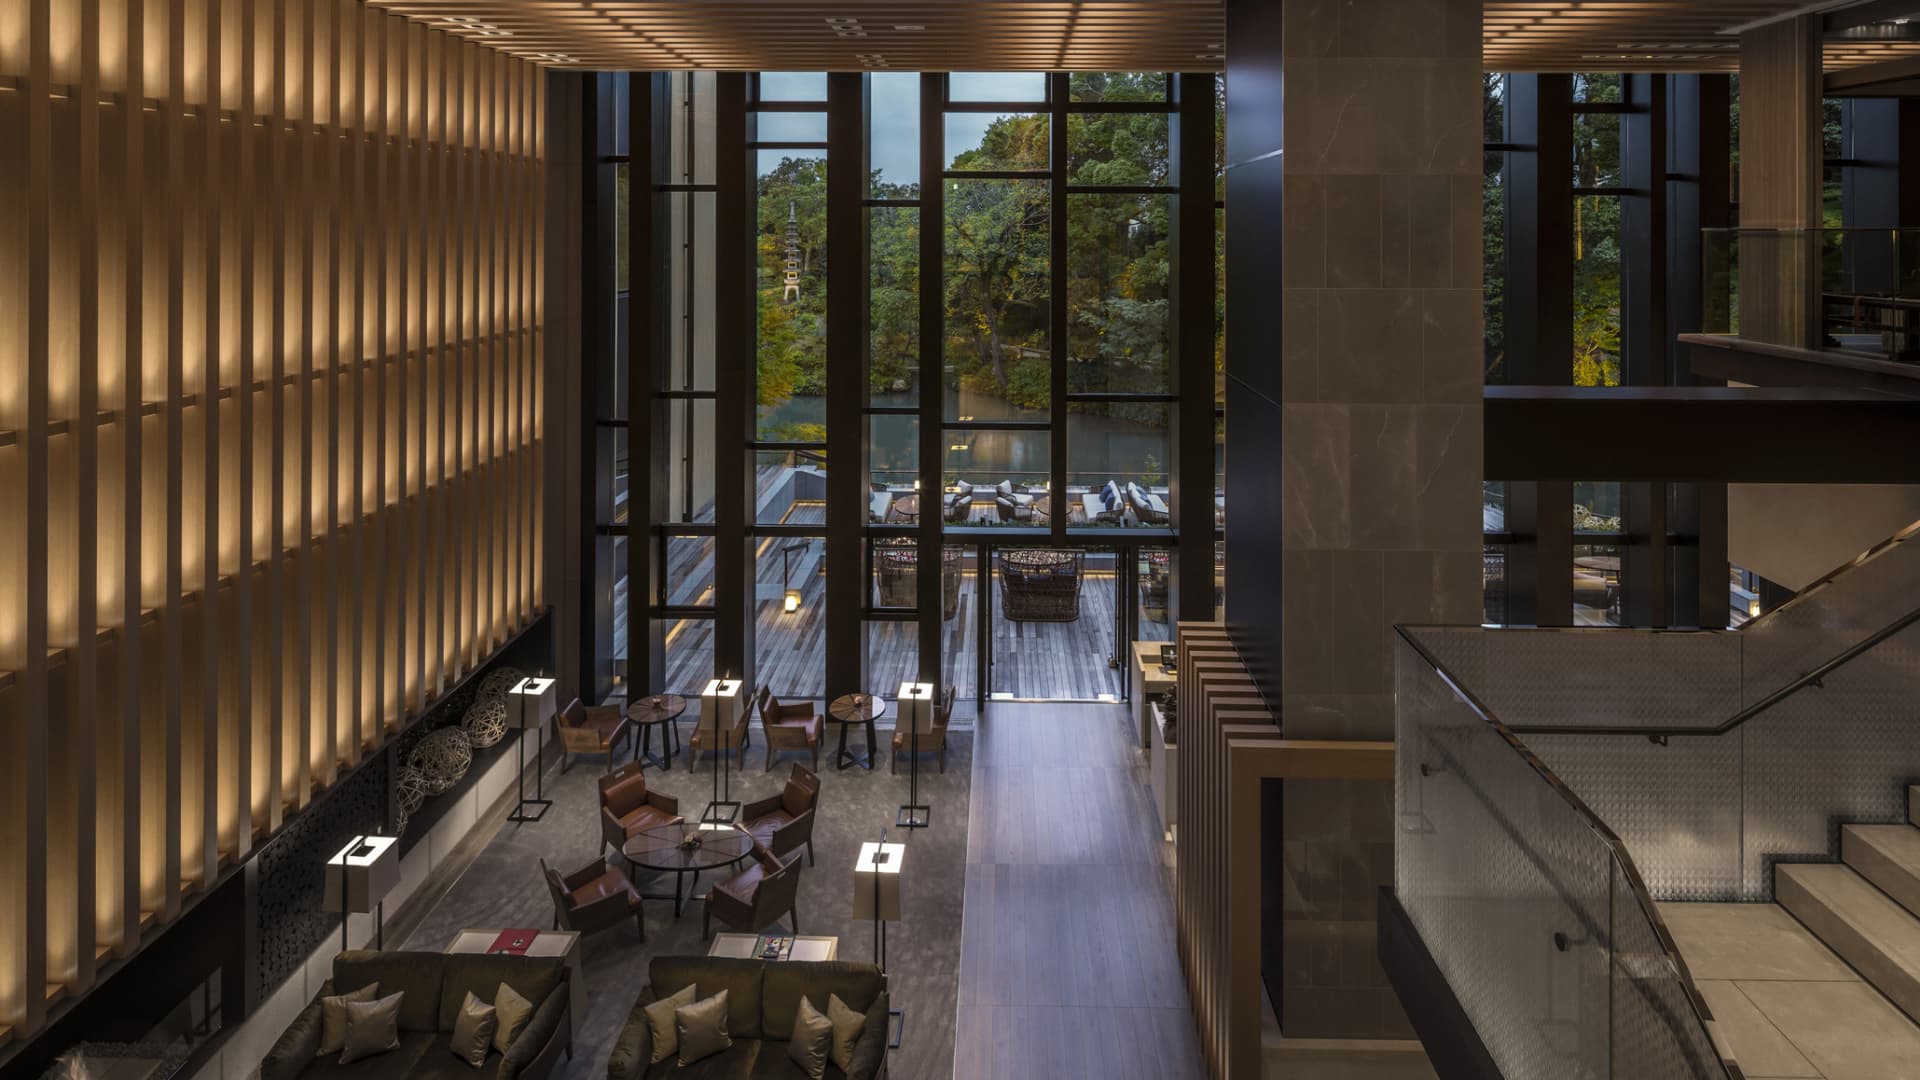 Japan has three Four Seasons hotels — two in Tokyo and one in Kyoto (pictured).